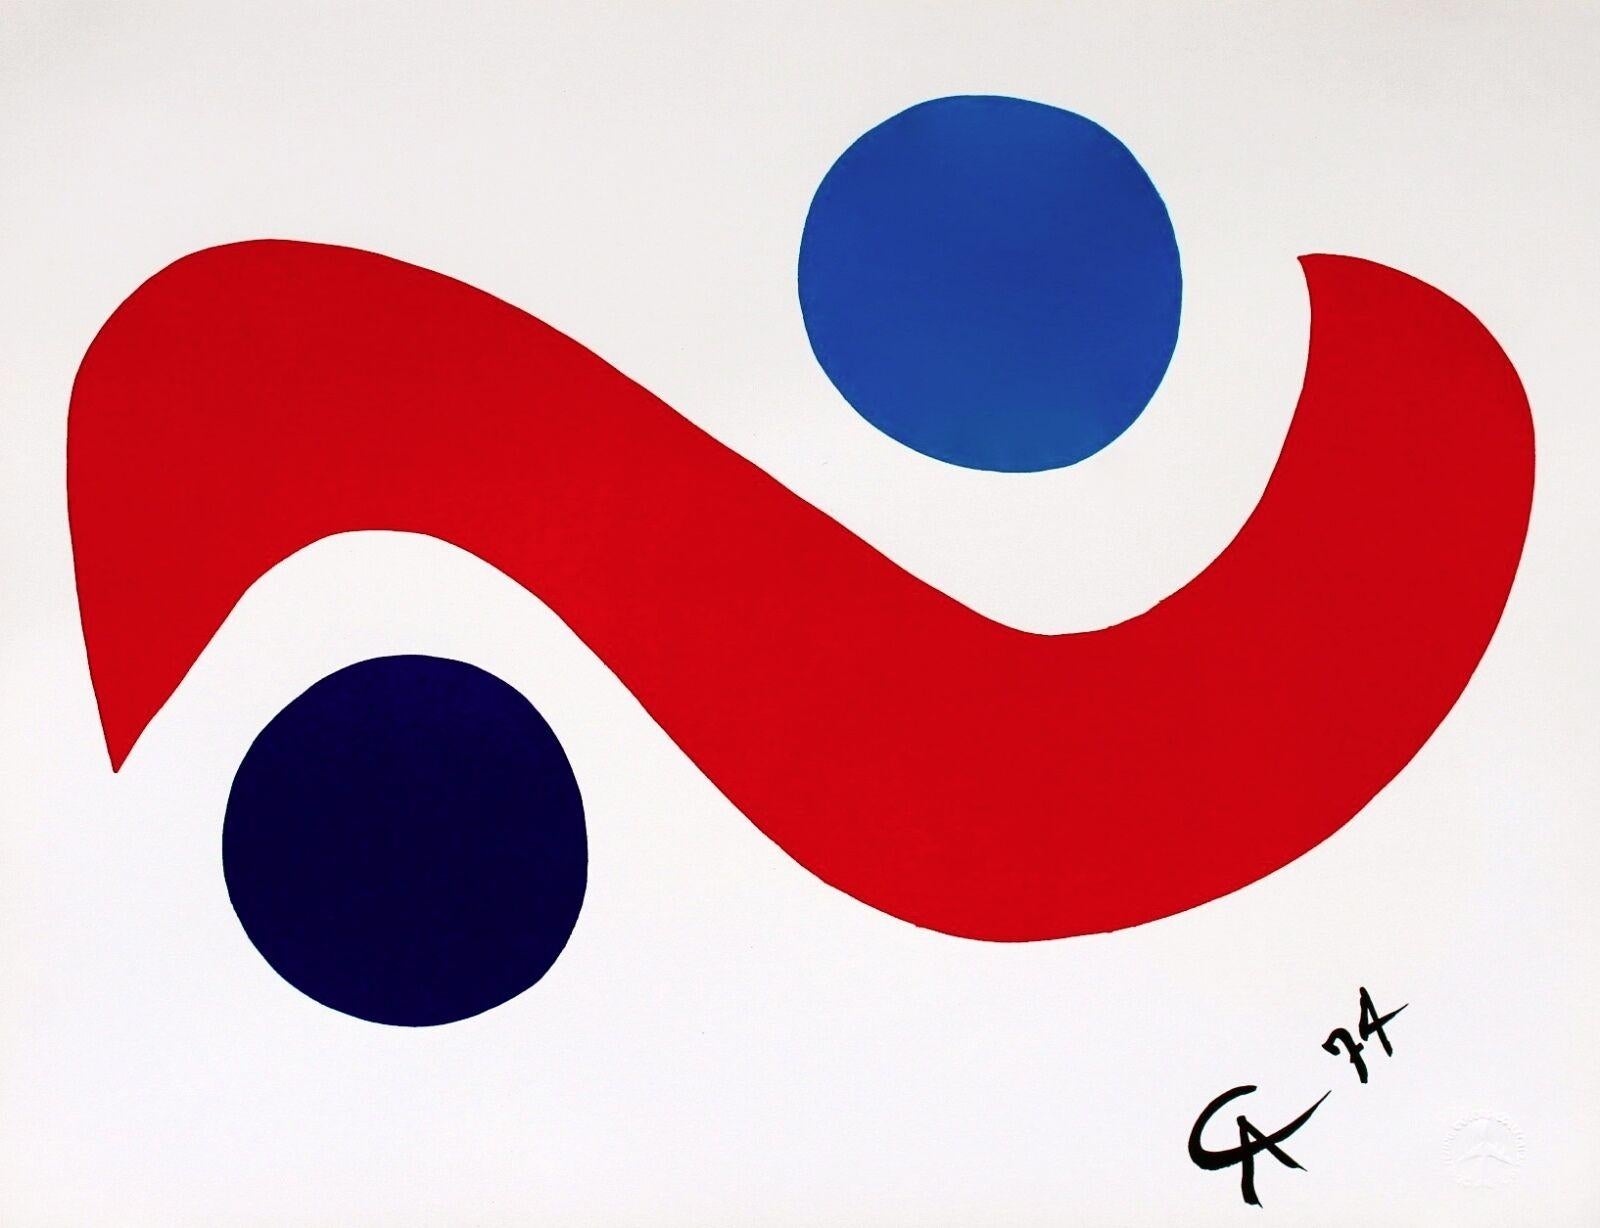 Artist: Alexander Calder (1898-1976)
Title: Sky Bird (from the Braniff International Airways Flying Colors Collection)
Year: 1974
Medium: Lithograph on Arches paper 
Size: 20 x 26 inches
Condition: Excellent
Edition: 3,000, plus proofs
Inscription: